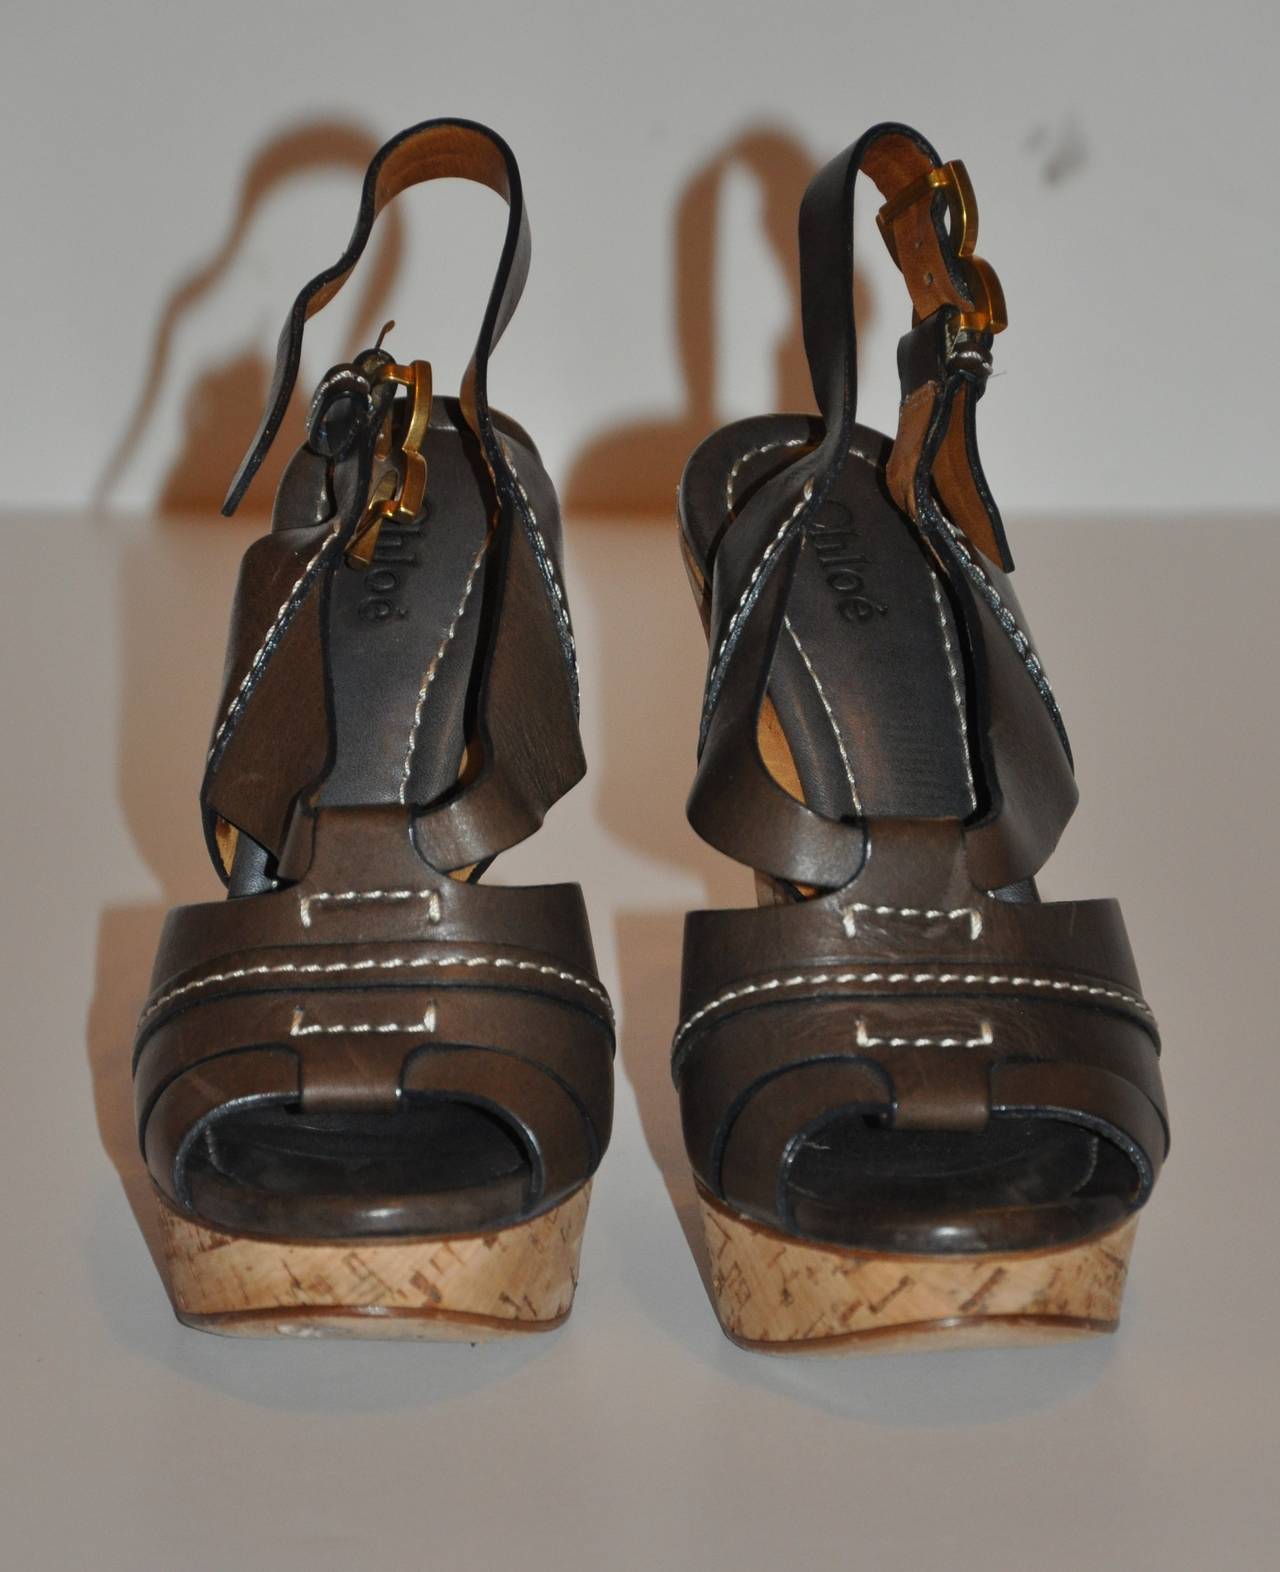 Chloe's wonderful wedge sandals are in a warm-brown calfskin with detailed top-stitching as well as gold hardware accented on the buckles. The heel measures 5 2/8